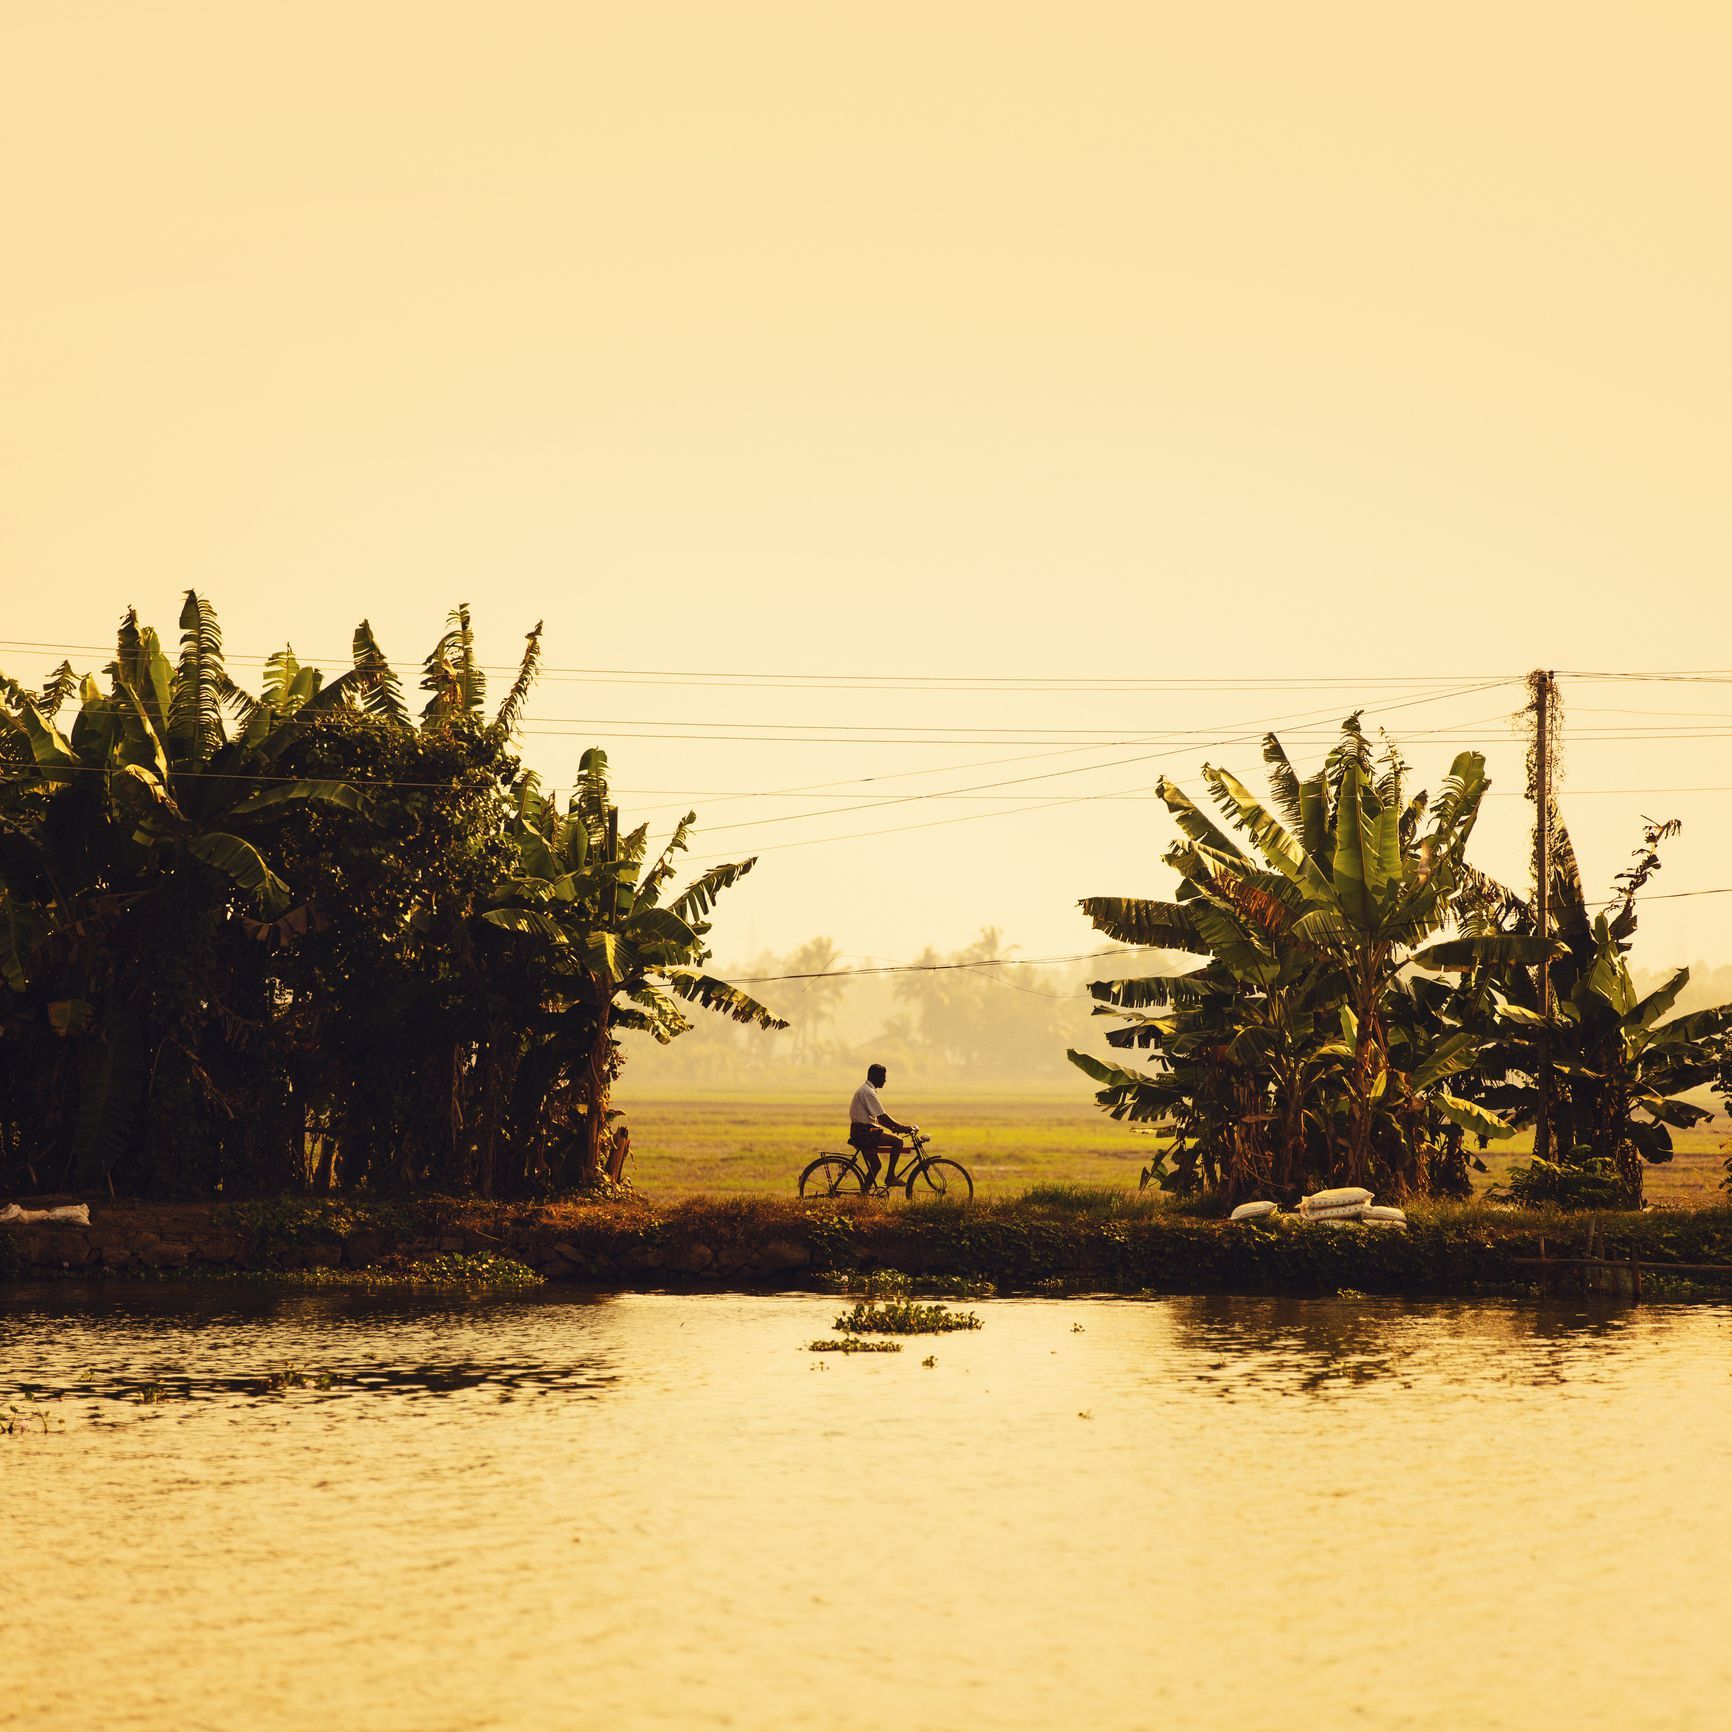 A man cycling along the side of the Kerala backwaters at sunset.